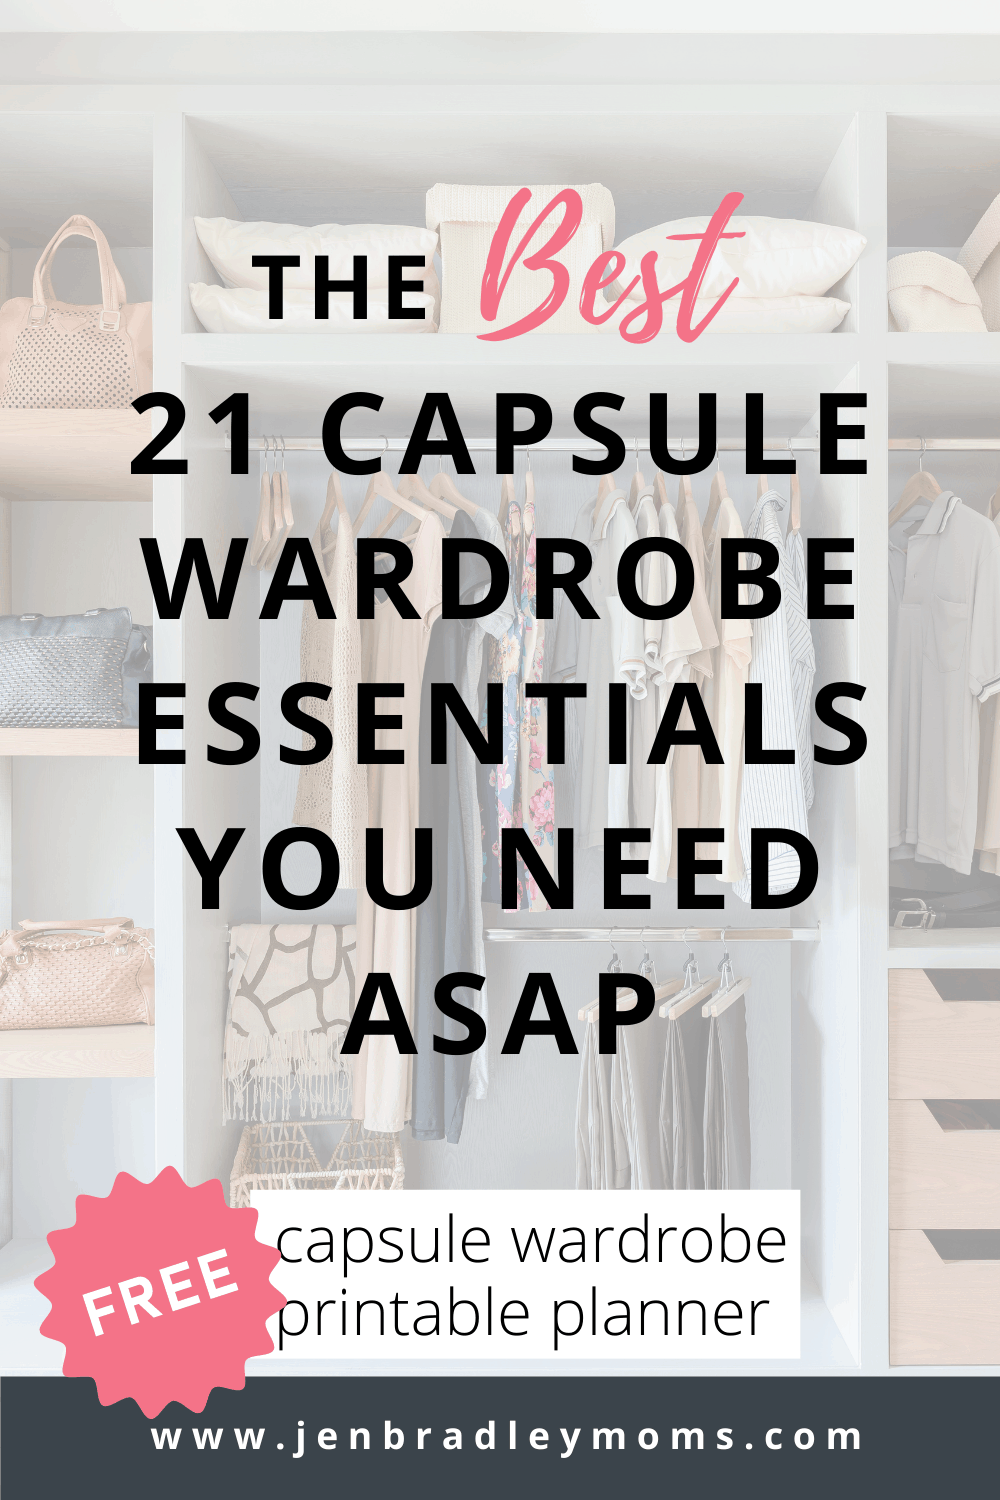 The 21 Best Capsule Wardrobe Essentials You Need ASAP